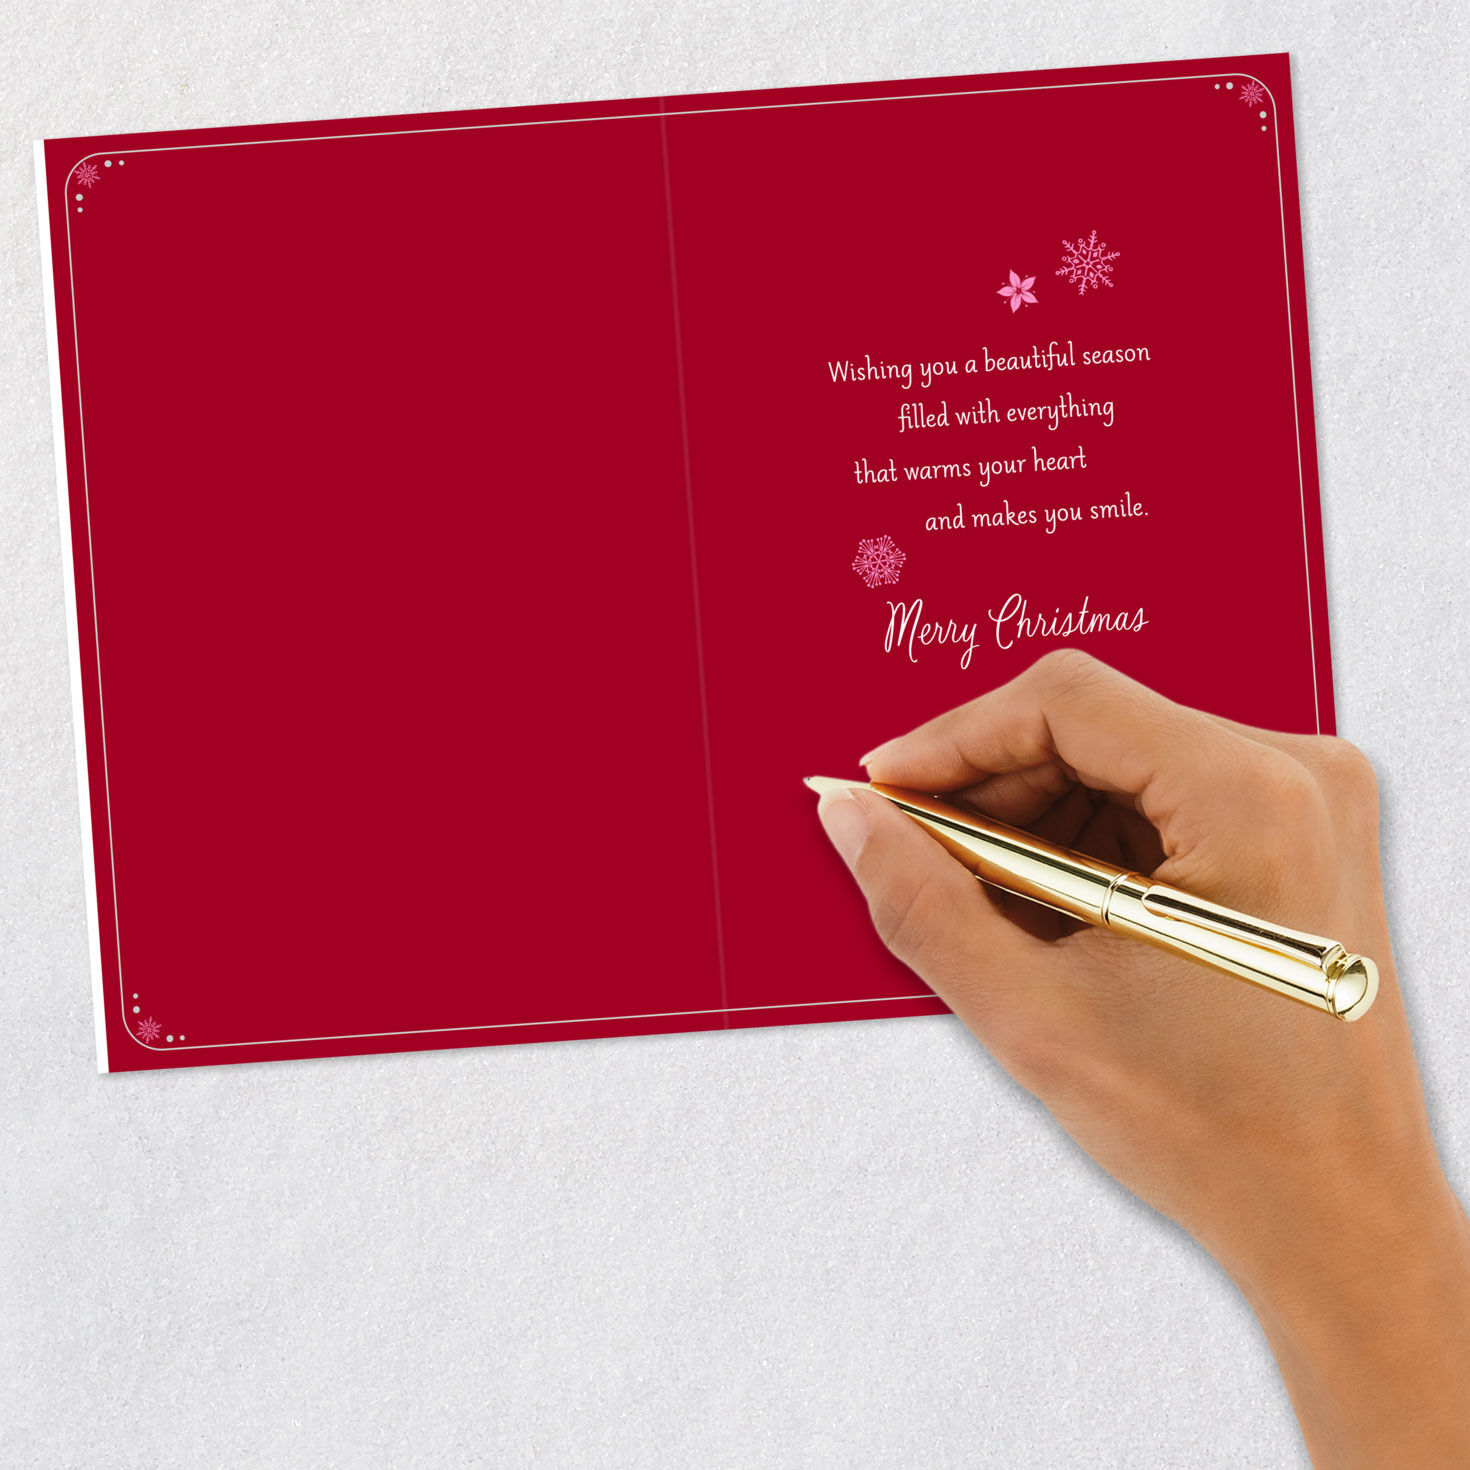 You Make Our Holidays Brighter Christmas Card for Niece for only USD 2.00 | Hallmark